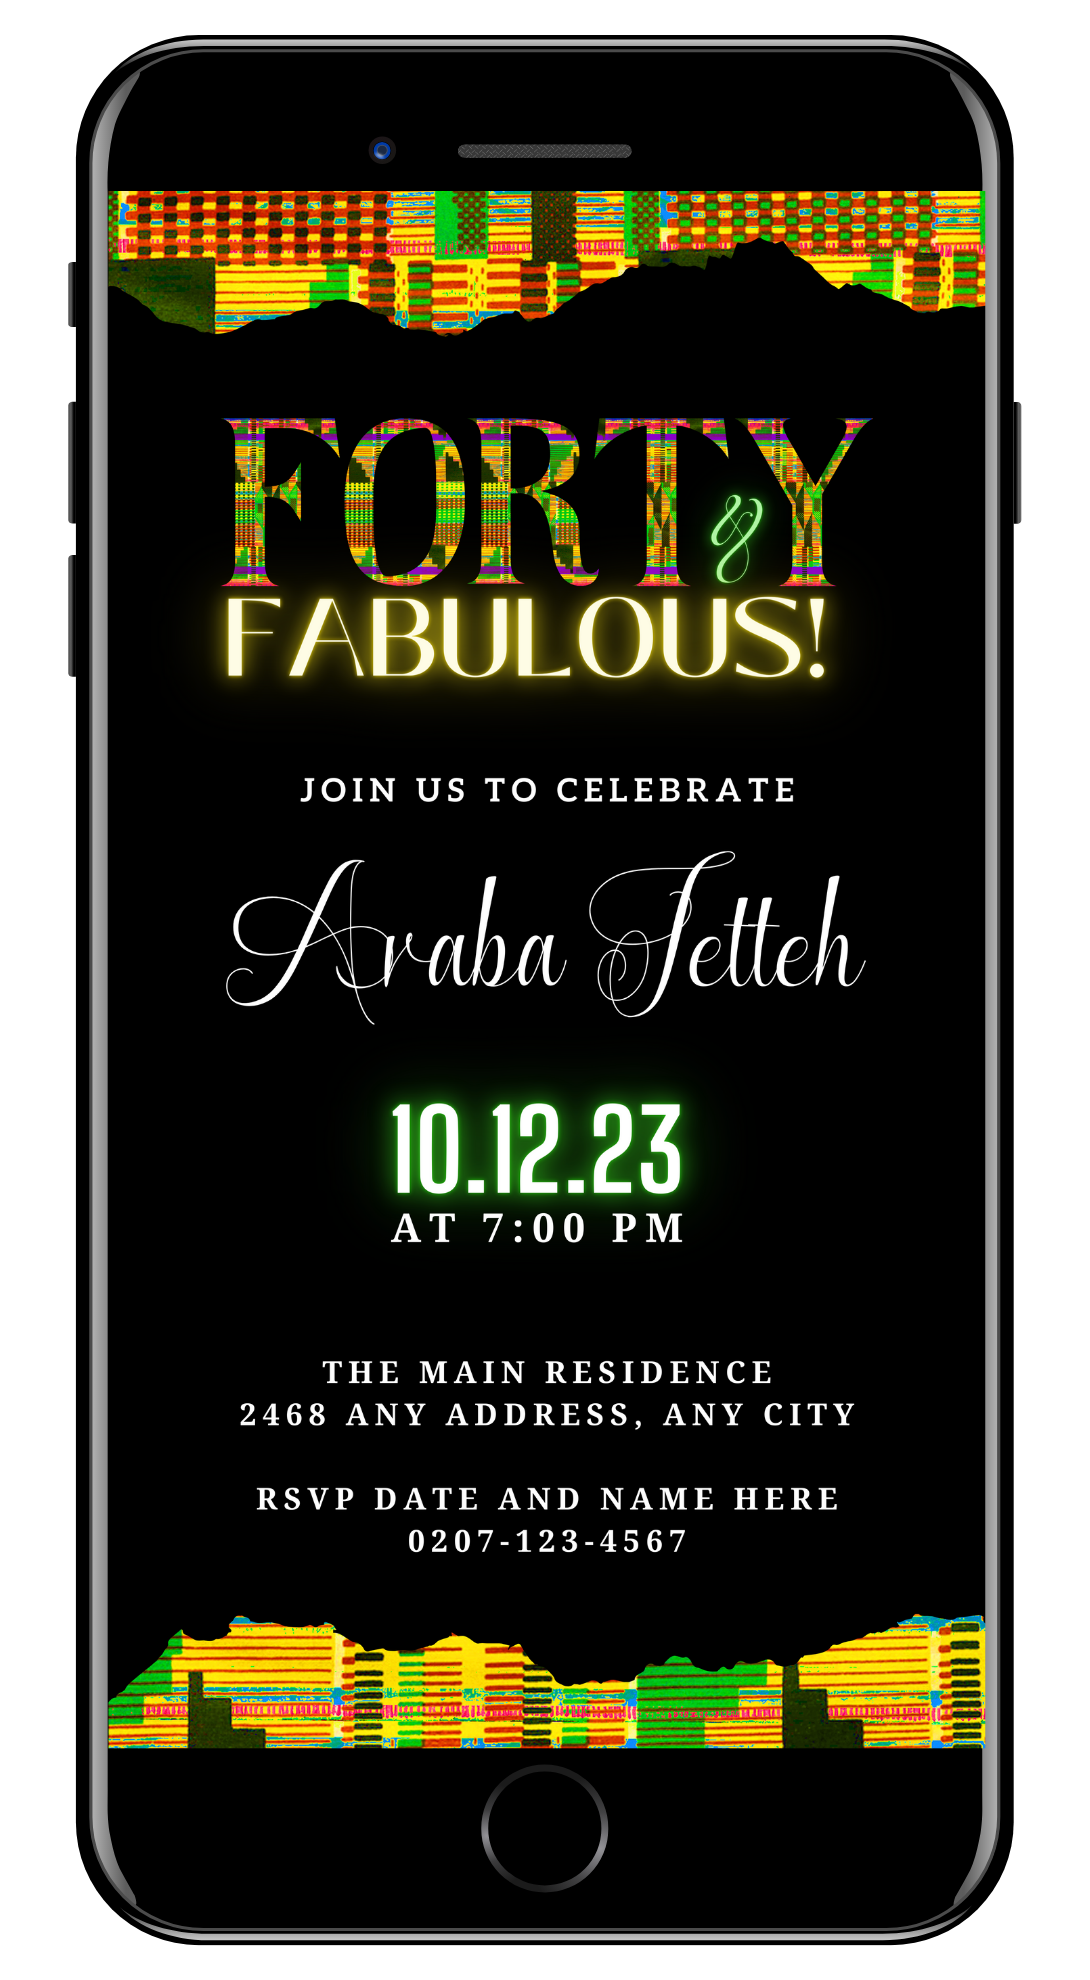 Editable digital invitation Green Yellow Kente | 40 & Fabulous Party Evite with customizable text and colorful design, shown on a smartphone screen.